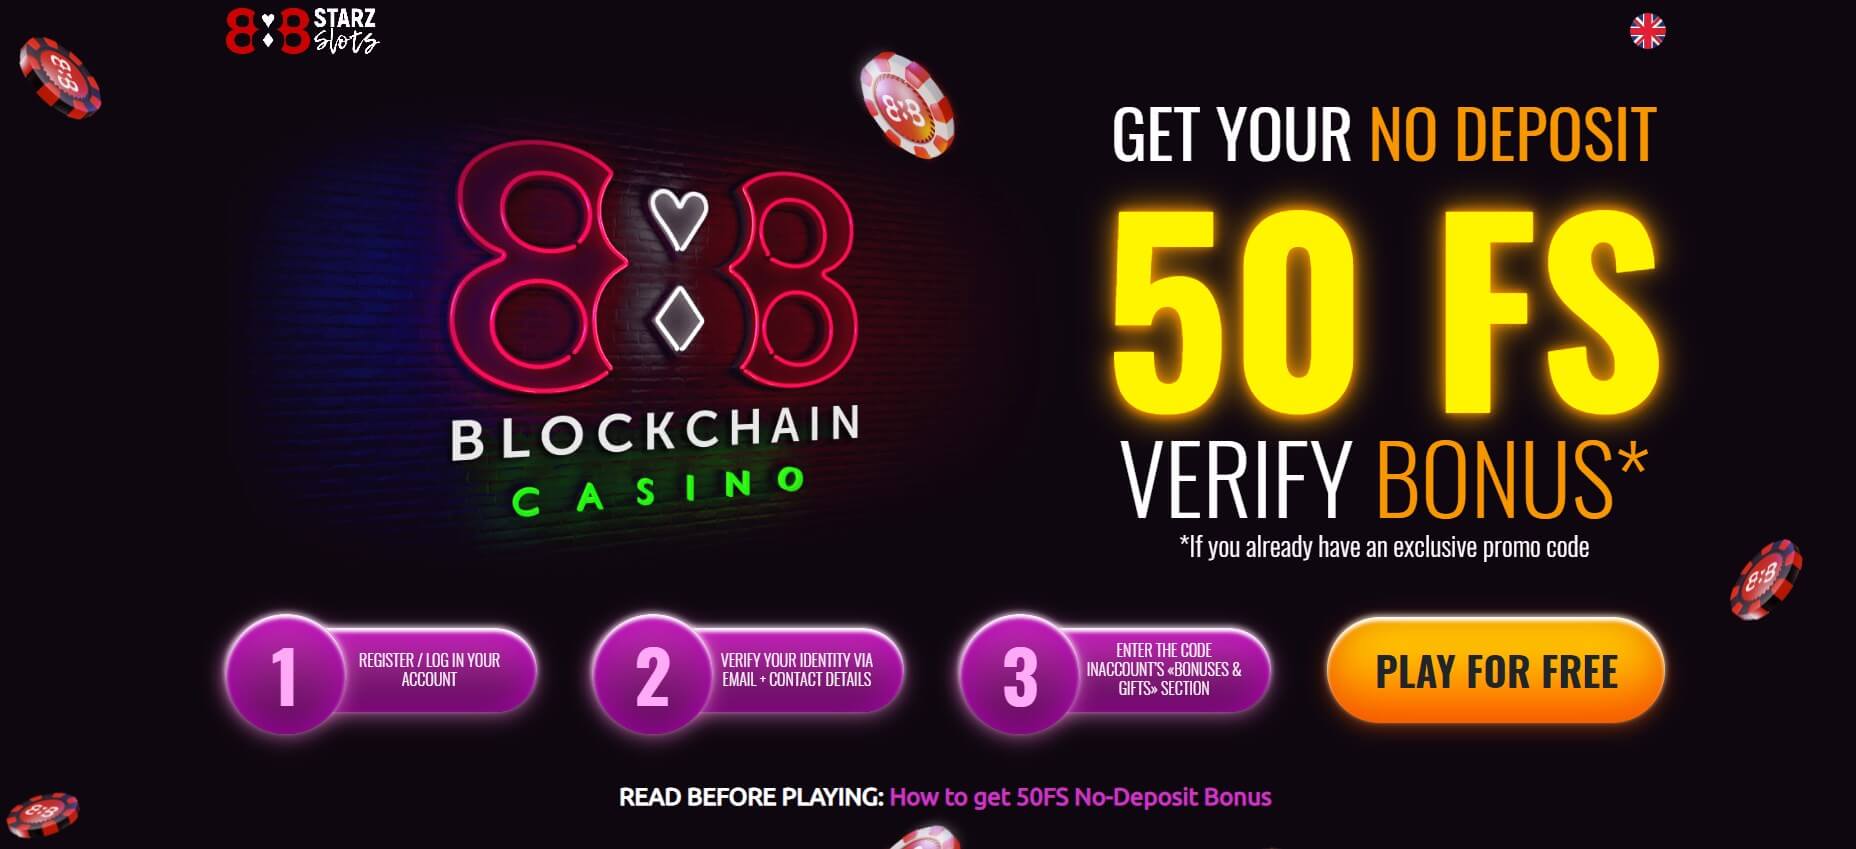 Can You Pass The crypto casino Test?